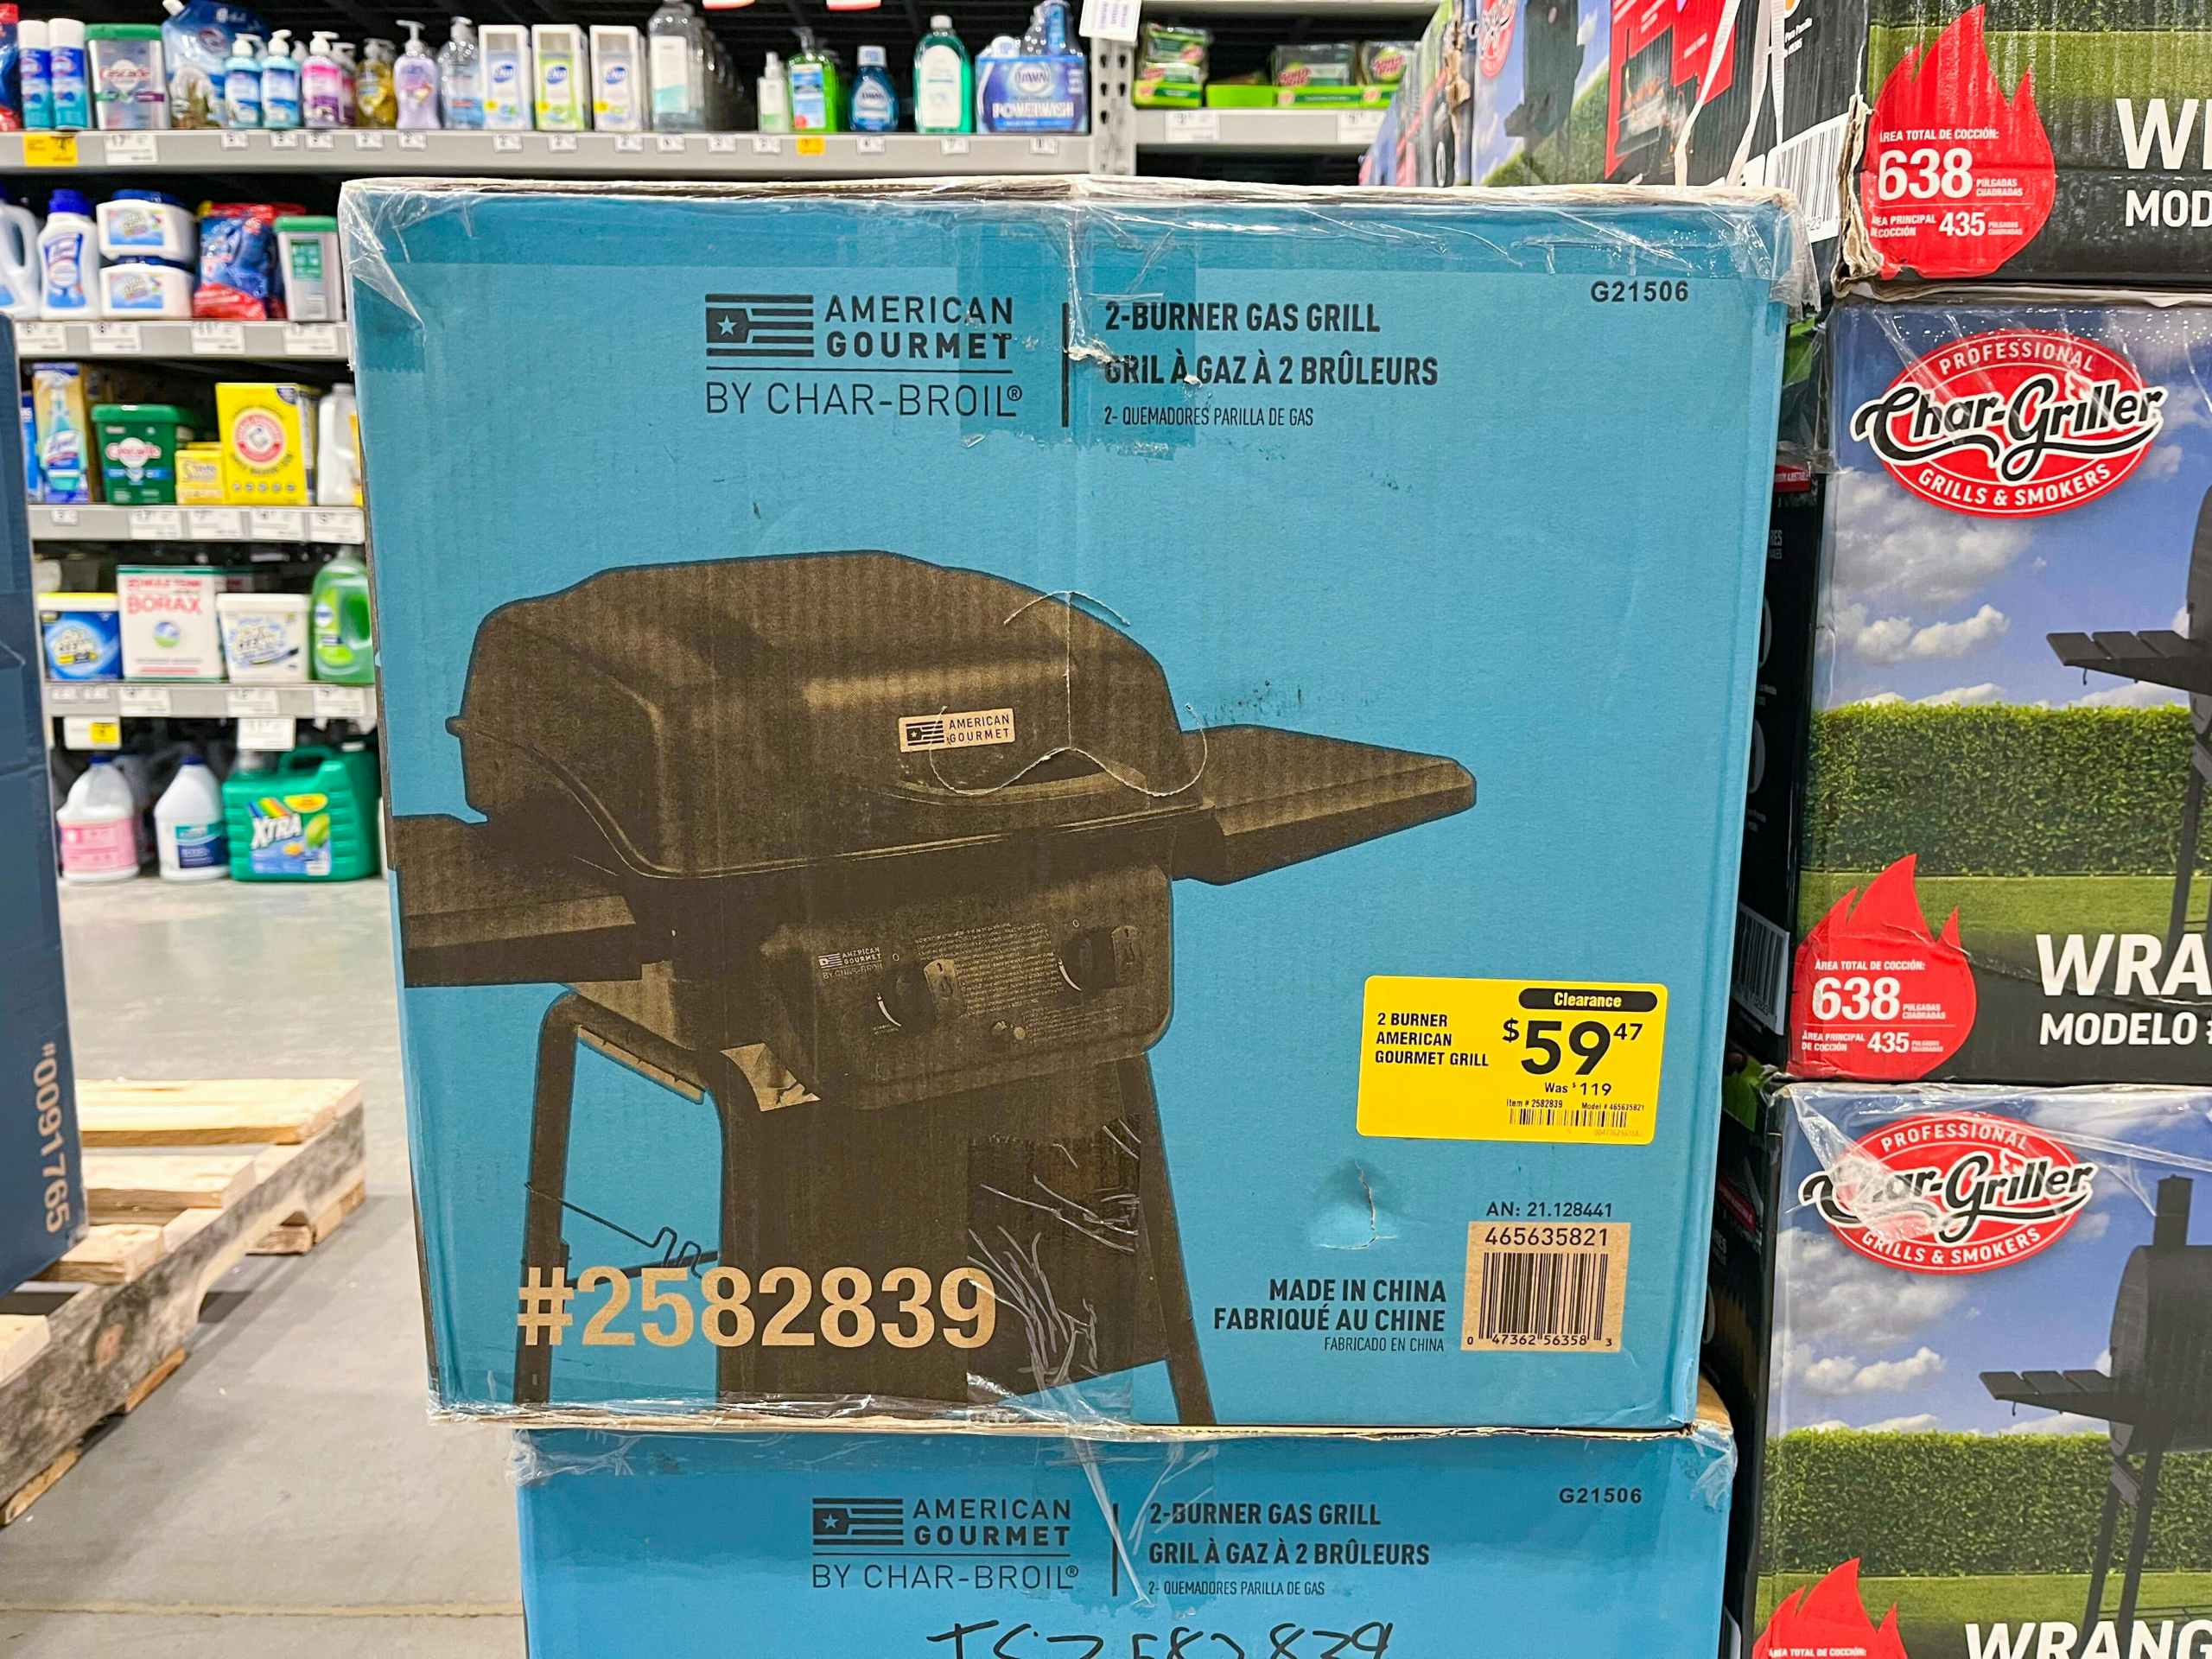 lowes year end clearance american gourmet grill on display